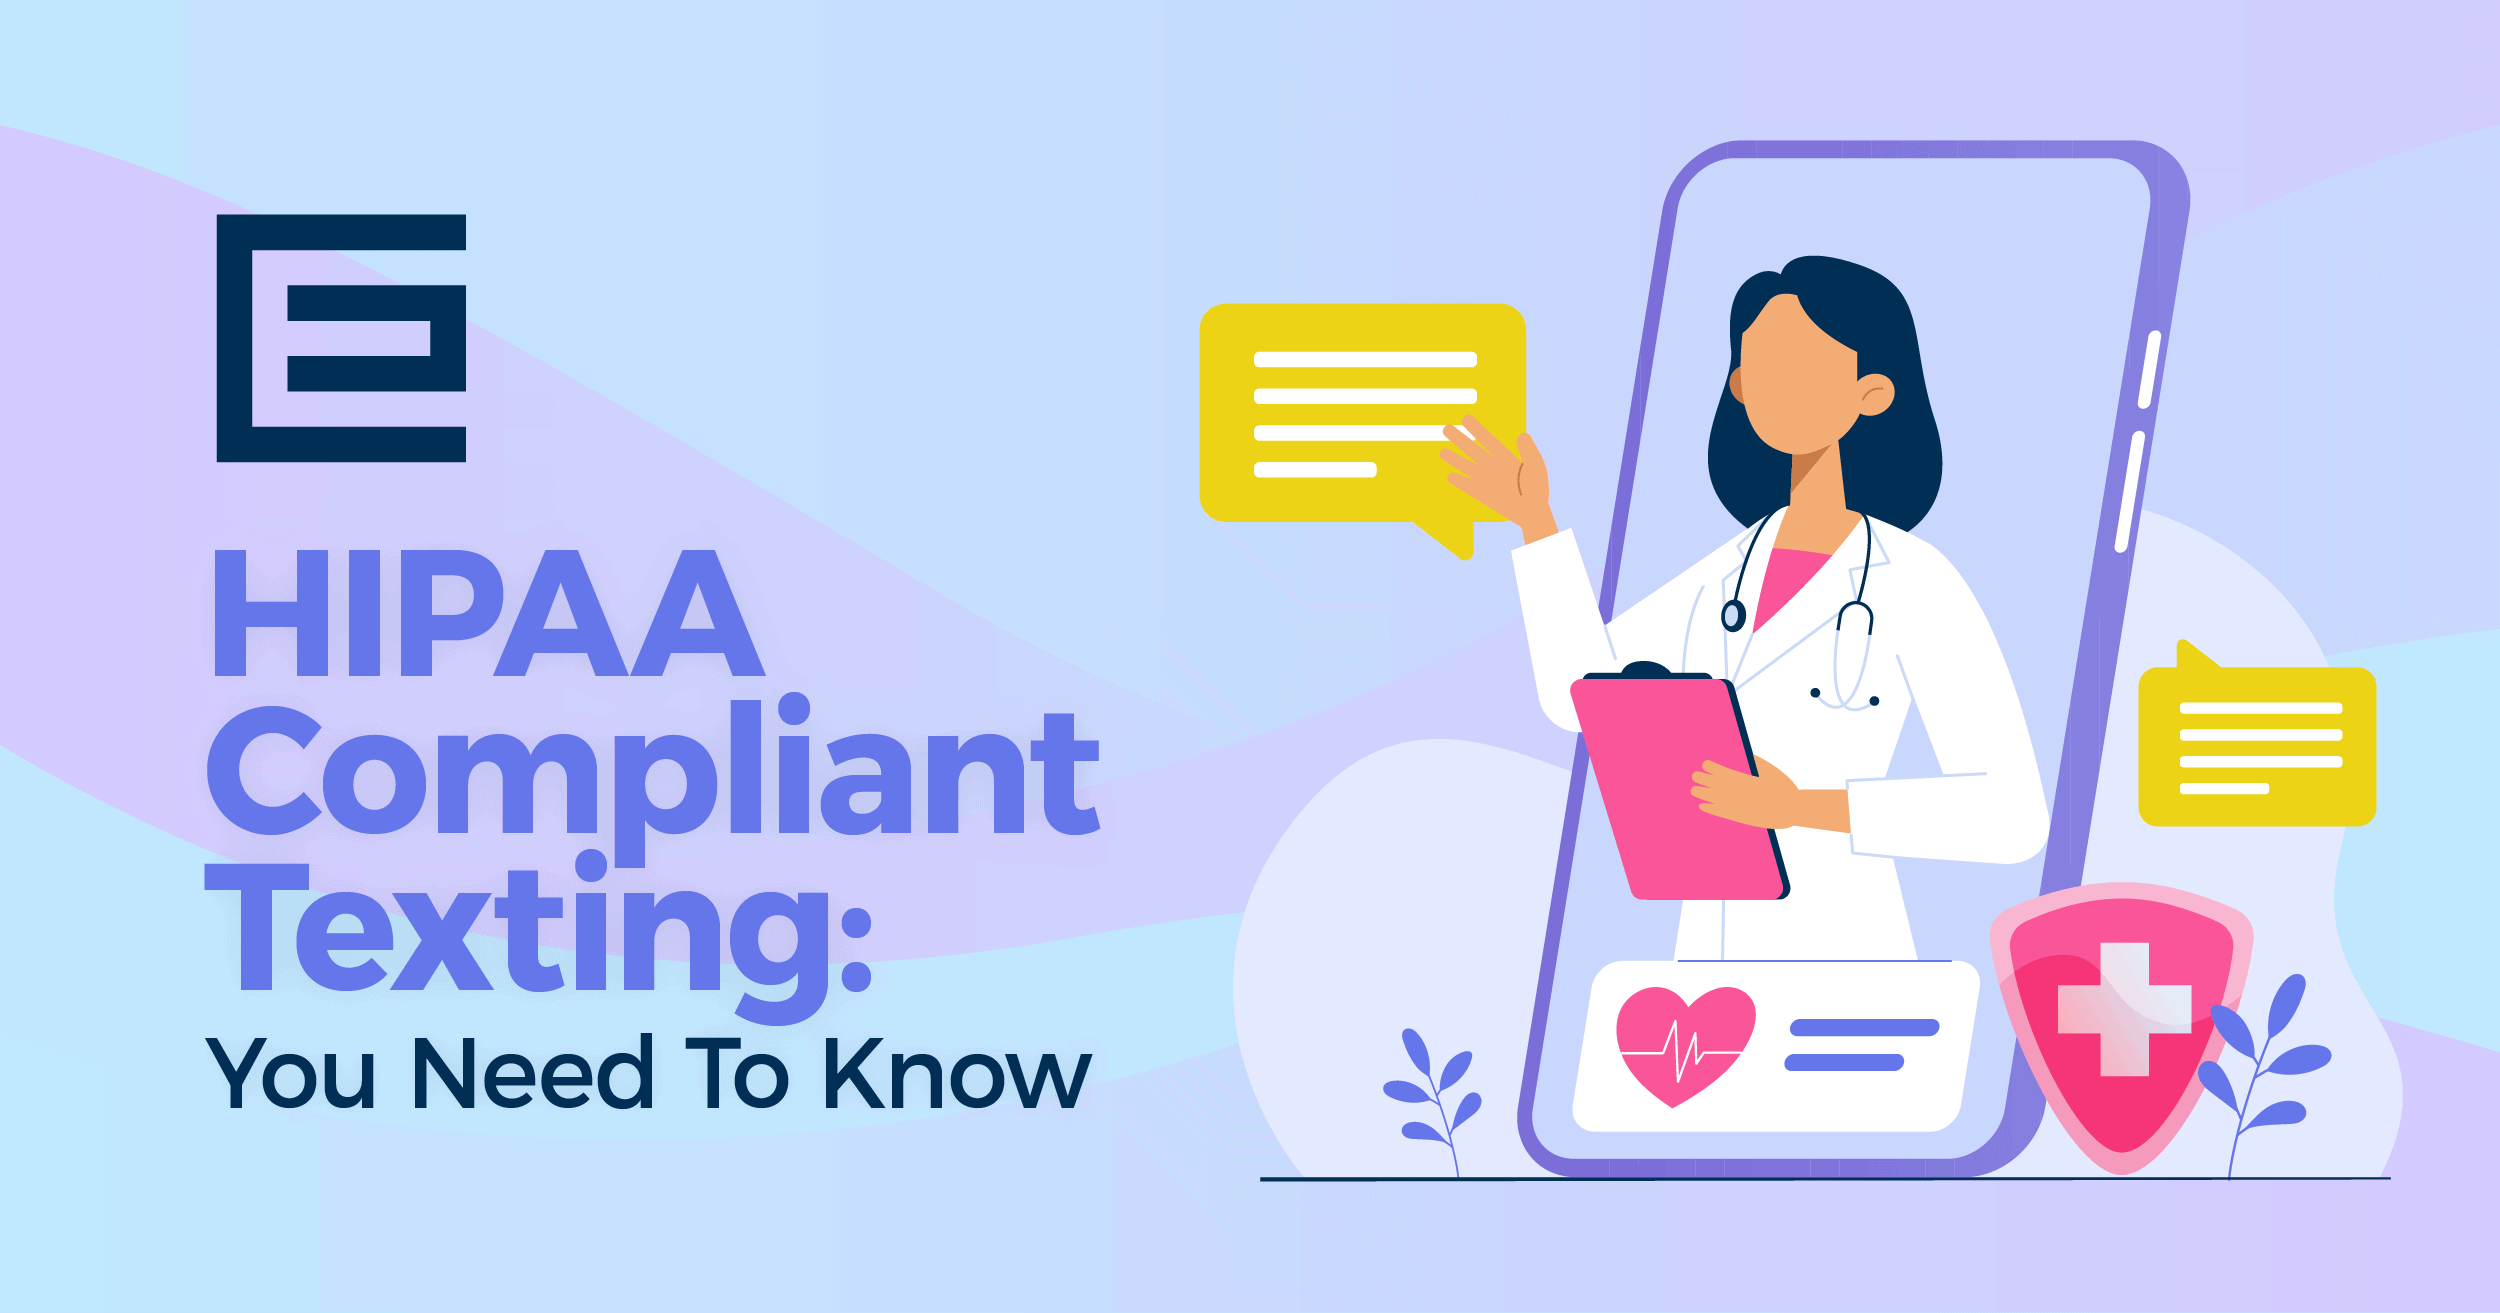 HIPAA Compliant Texting: Everything You Need To Know